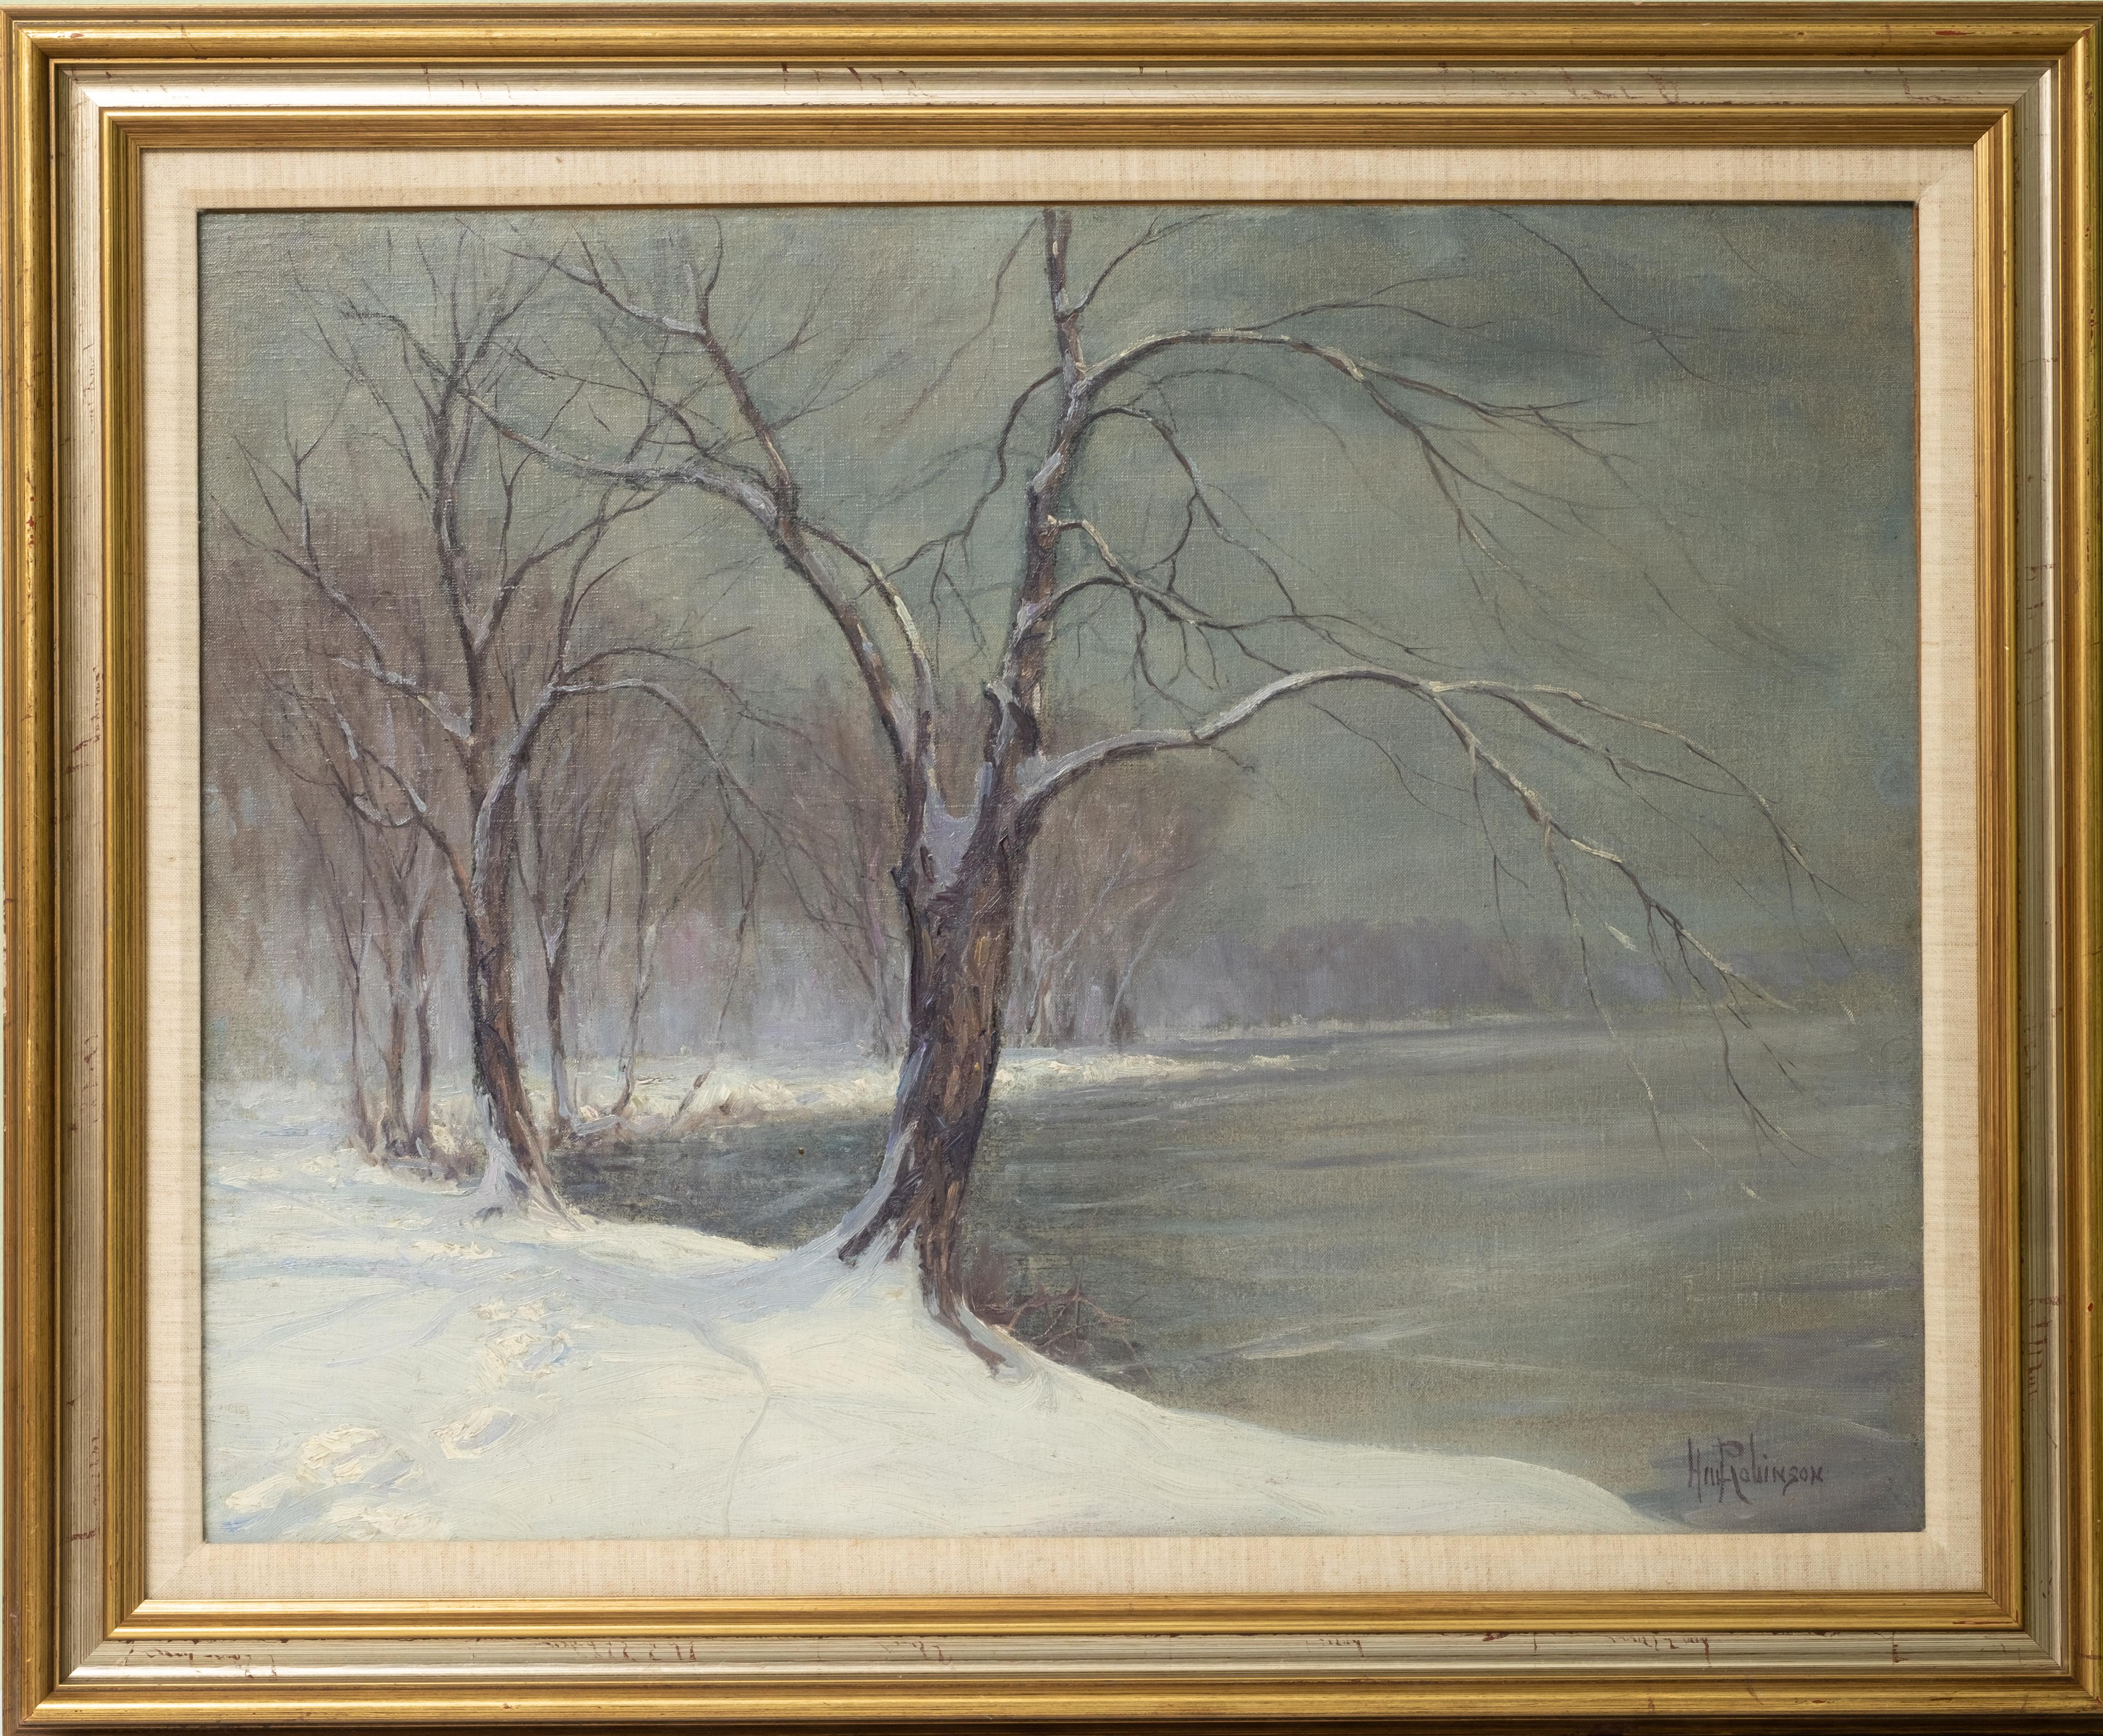 Hal Robinson (British/American,1867-1934). 'Winter Landscape', oil on canvas, signed lower right 'Hal Robinson'. The following biography was researched, compiled, and written by Geoffrey K. Fleming, Executive Director, Huntington Museum of Art,